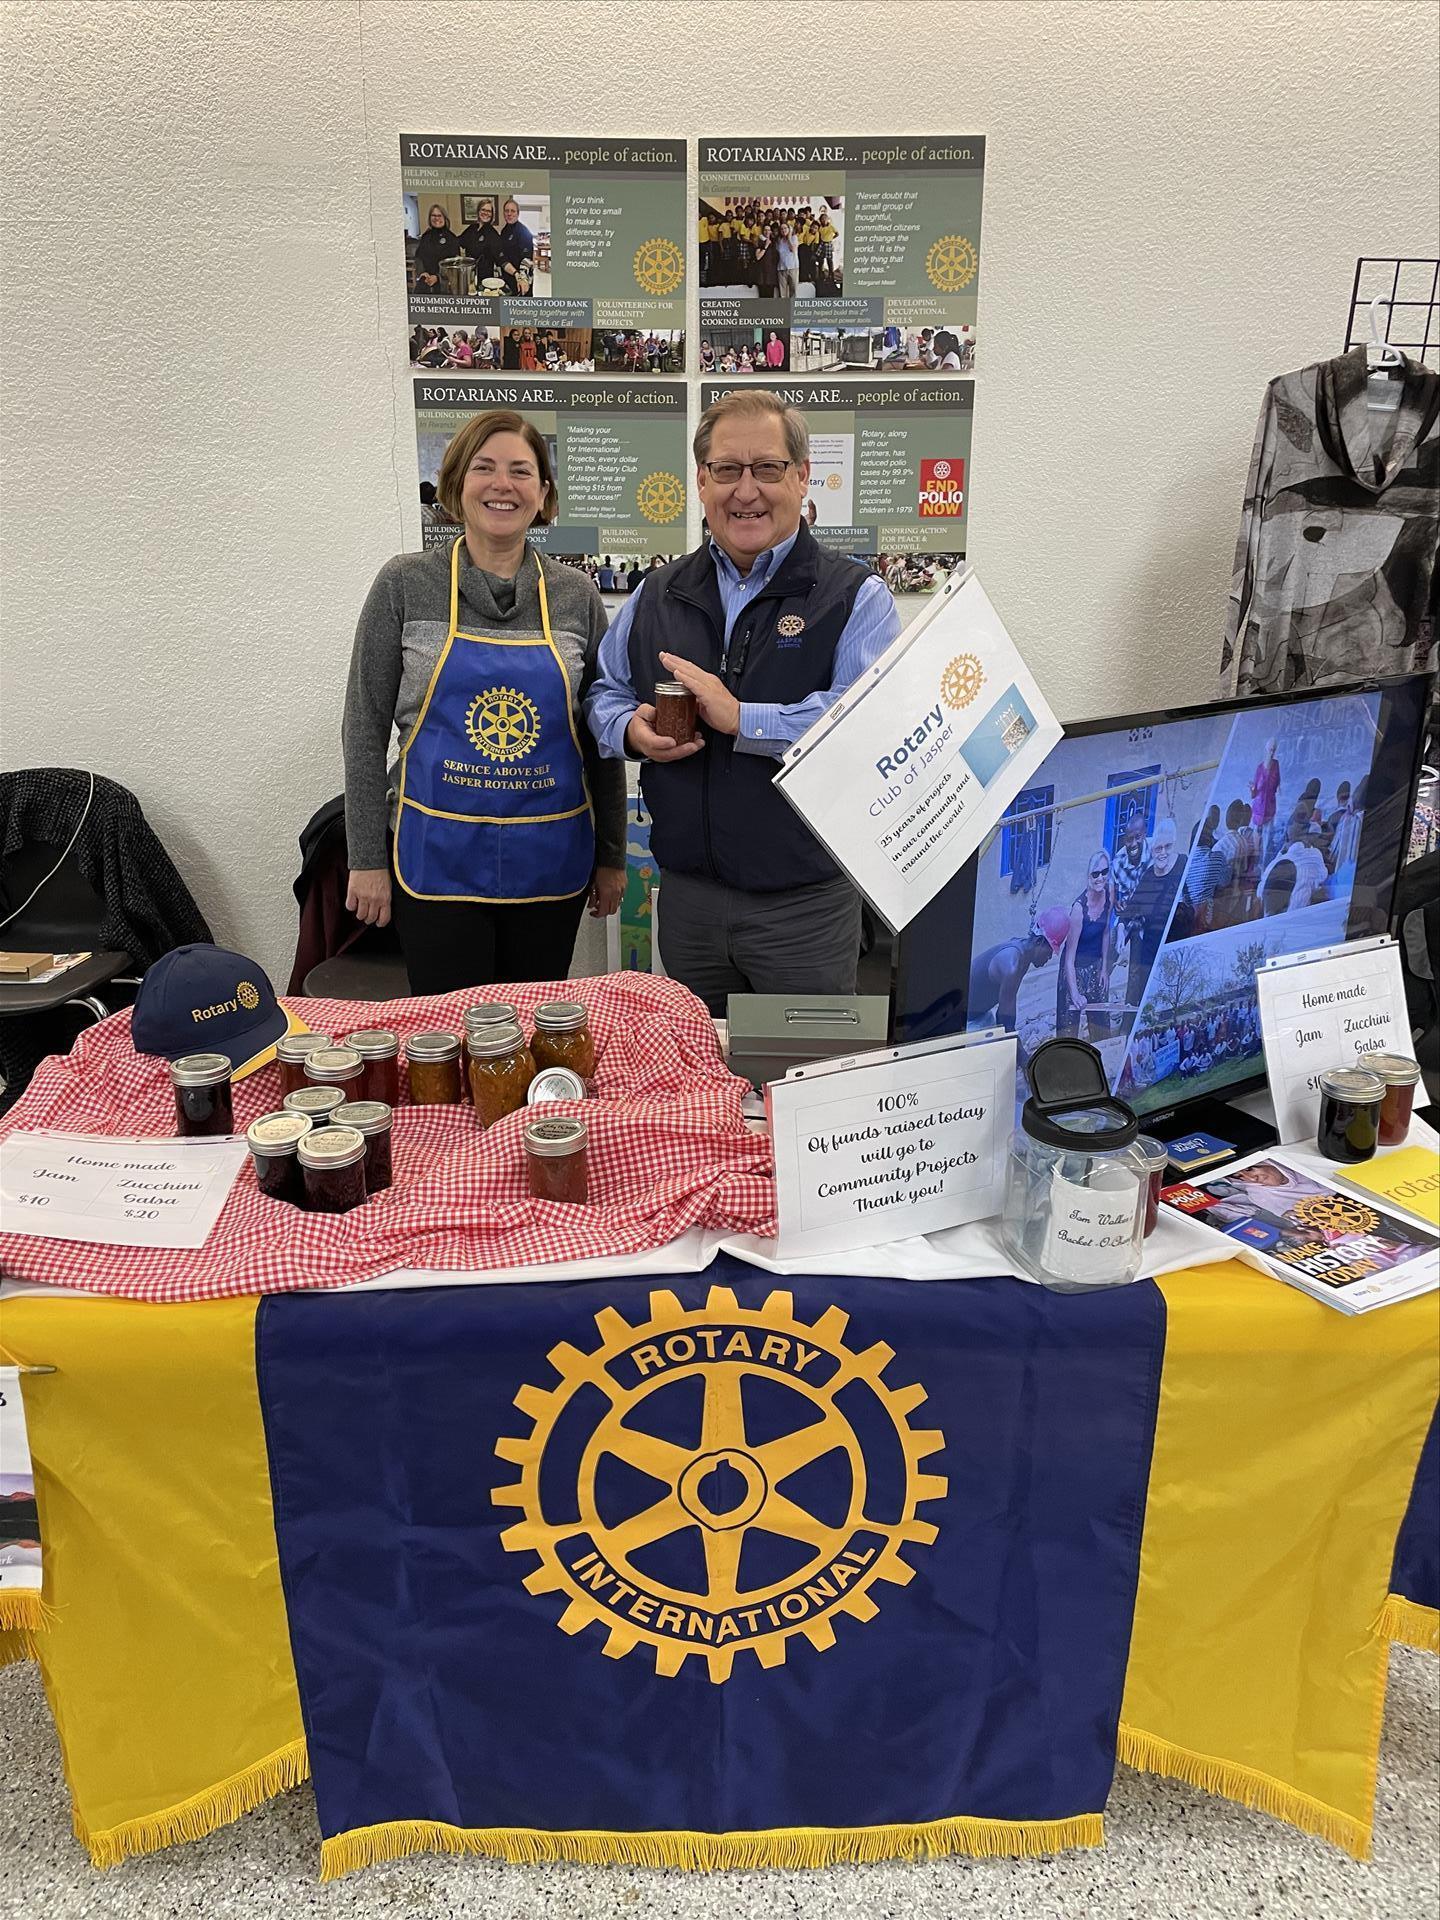 Two Rotarians stand in front of a booth adorned with a yellow and blue banner  